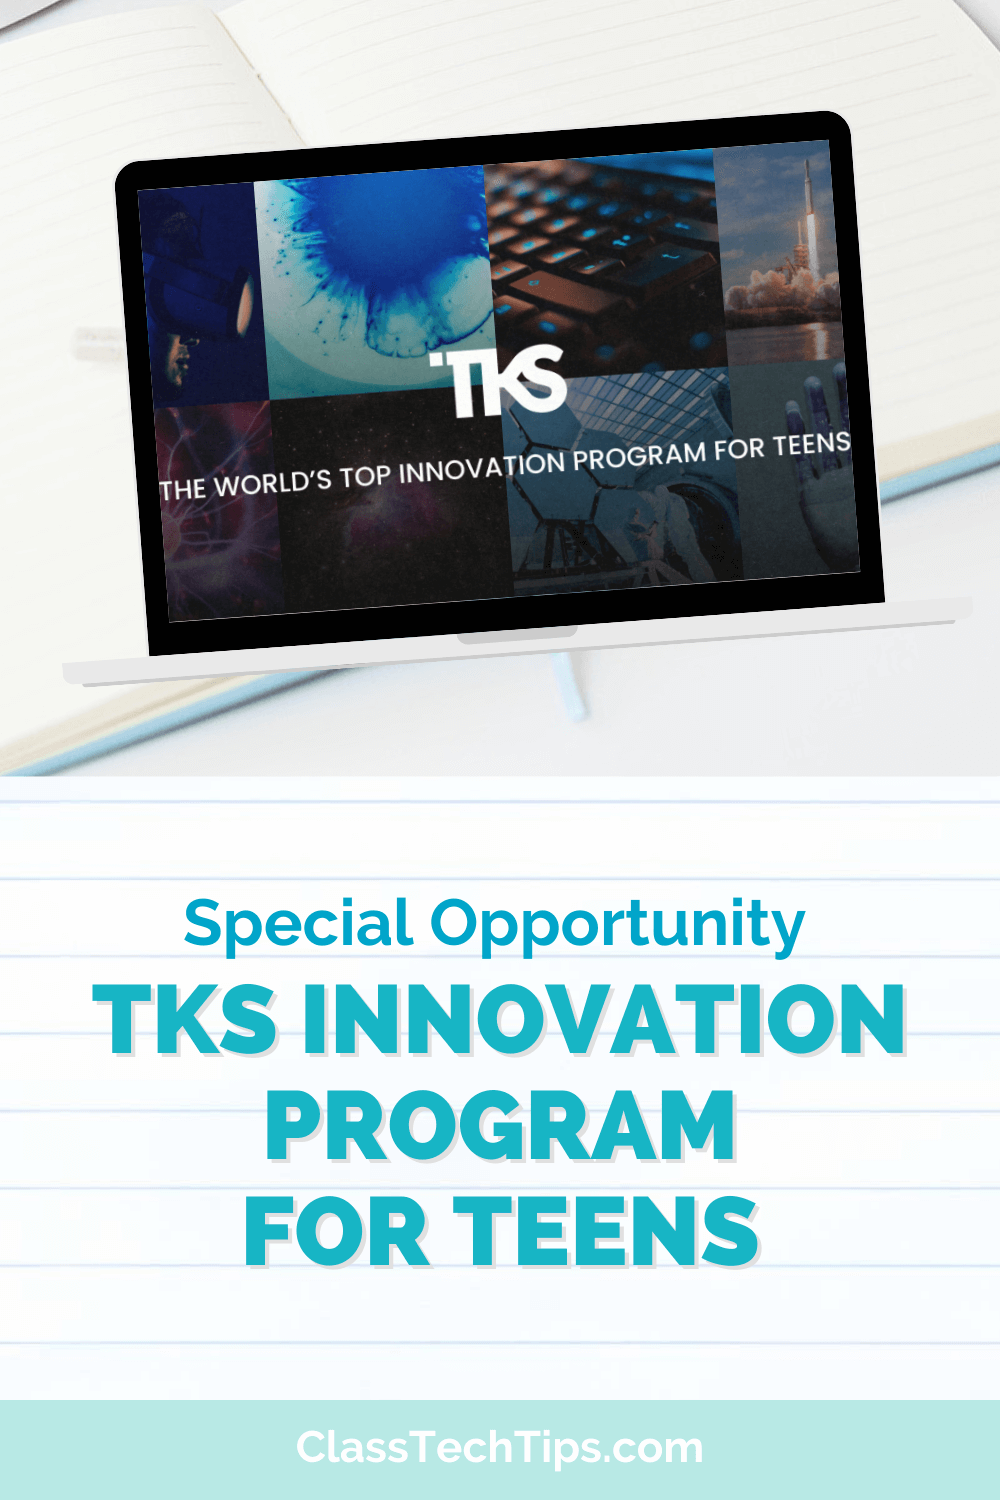 A computer screen displaying the TKS Innovation Program for Teens website. Text on the screen highlights it as the world's top innovation program for teens.